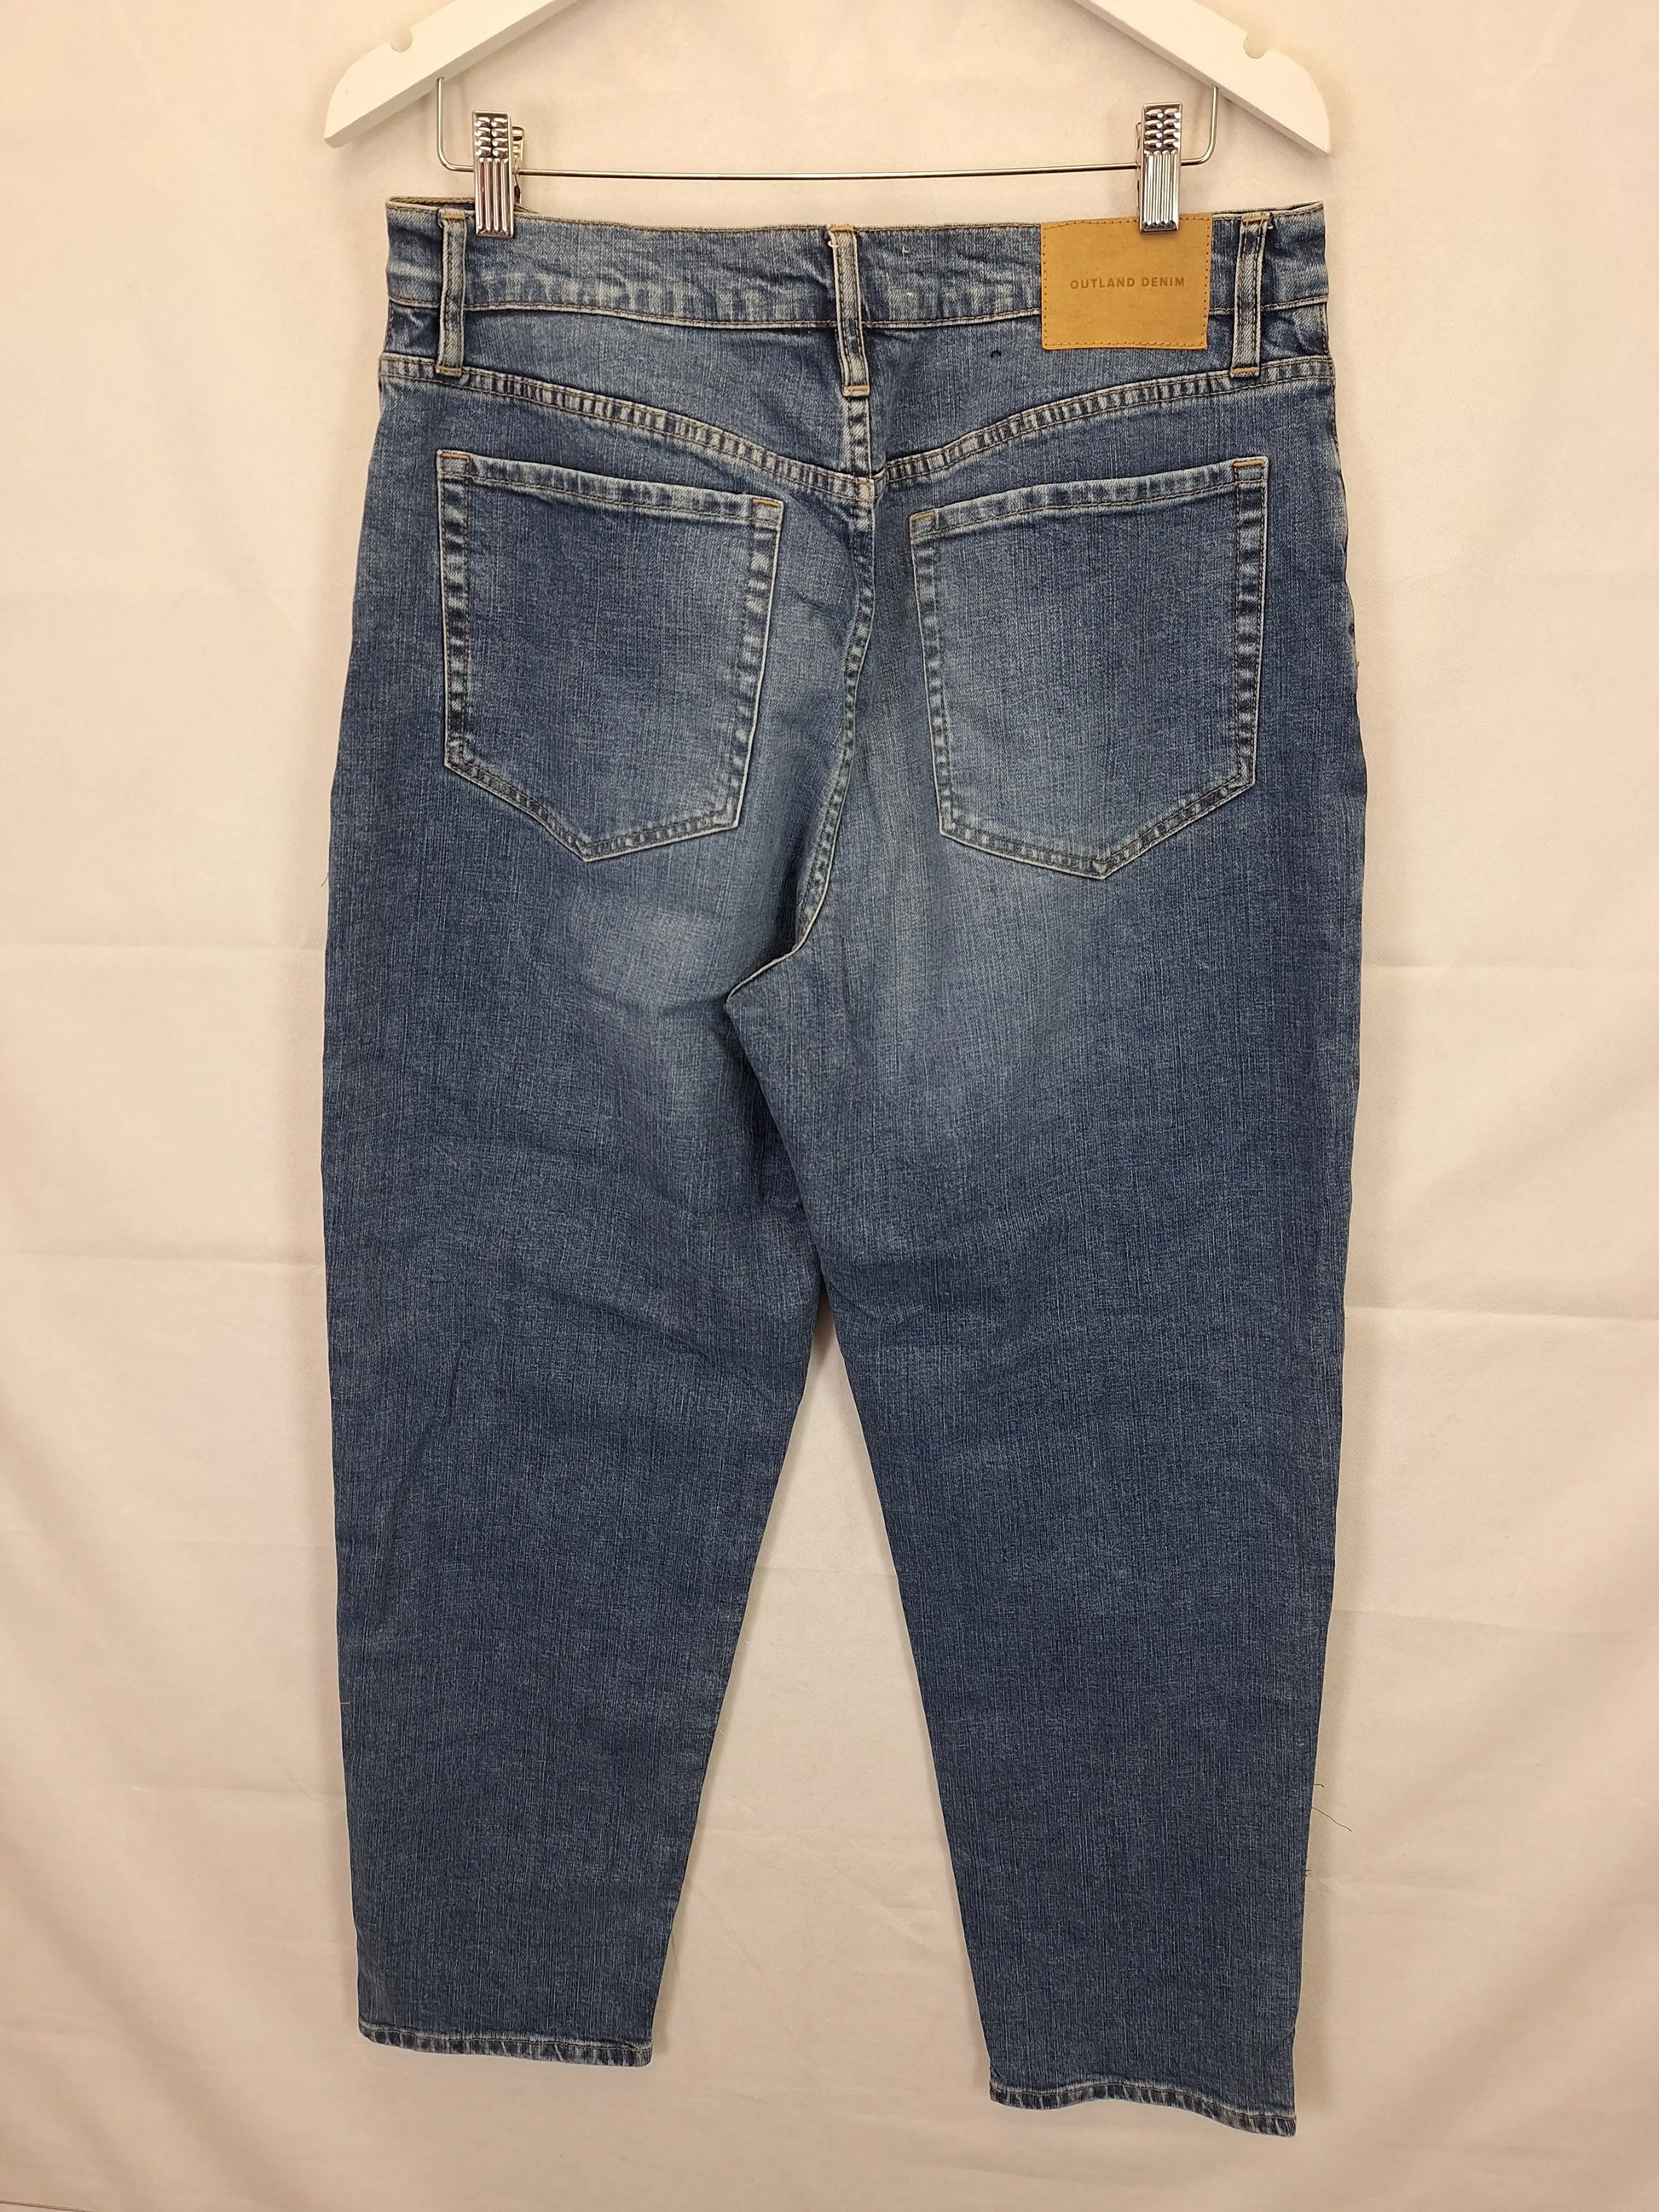 Outland Denim Abigail New Blue Jeans Size 14 by SwapUp-Online Second Hand Store-Online Thrift Store